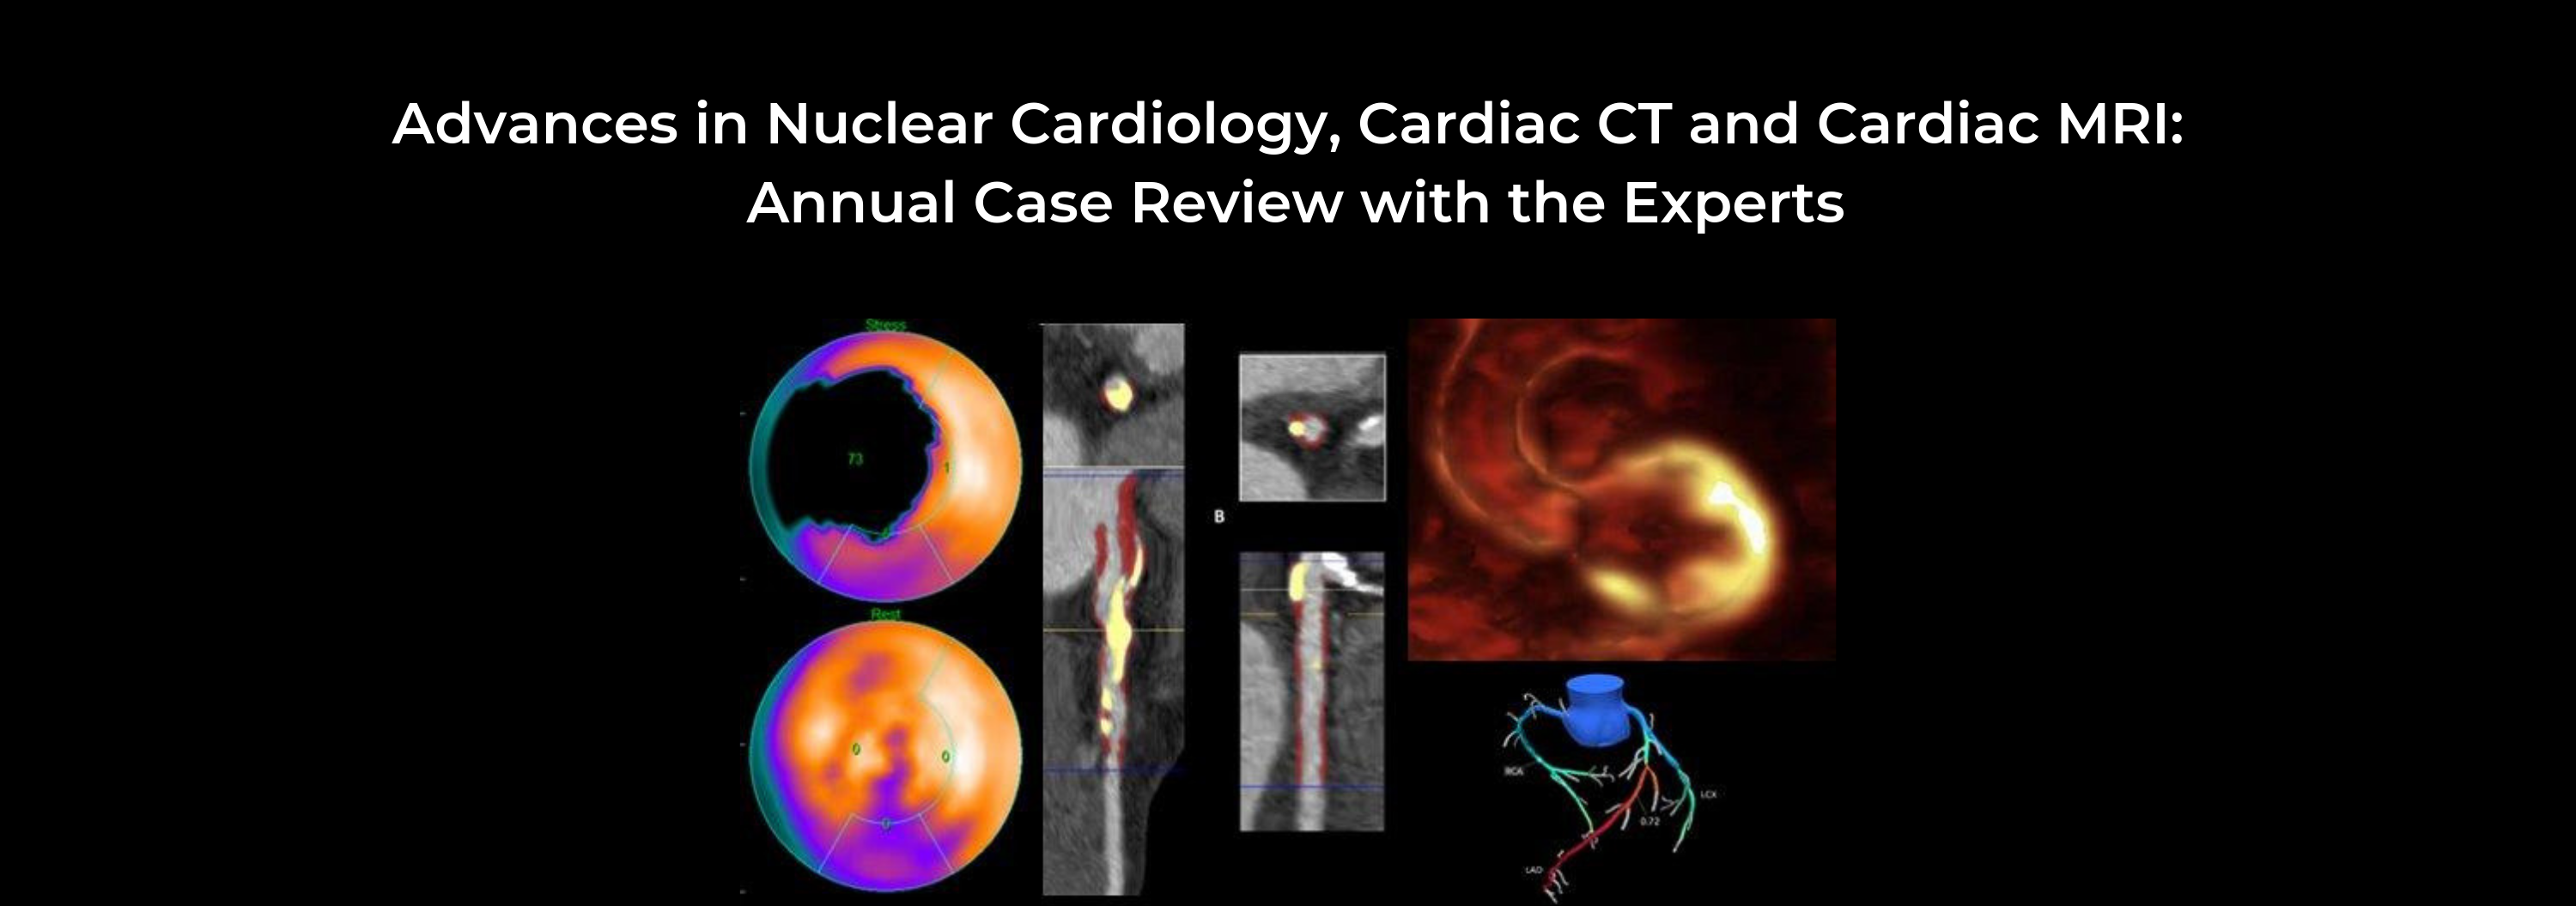 Advances in Nuclear Cardiology, Cardiac CT and Cardiac MRI: 35th Annual Case Review with the Experts Banner